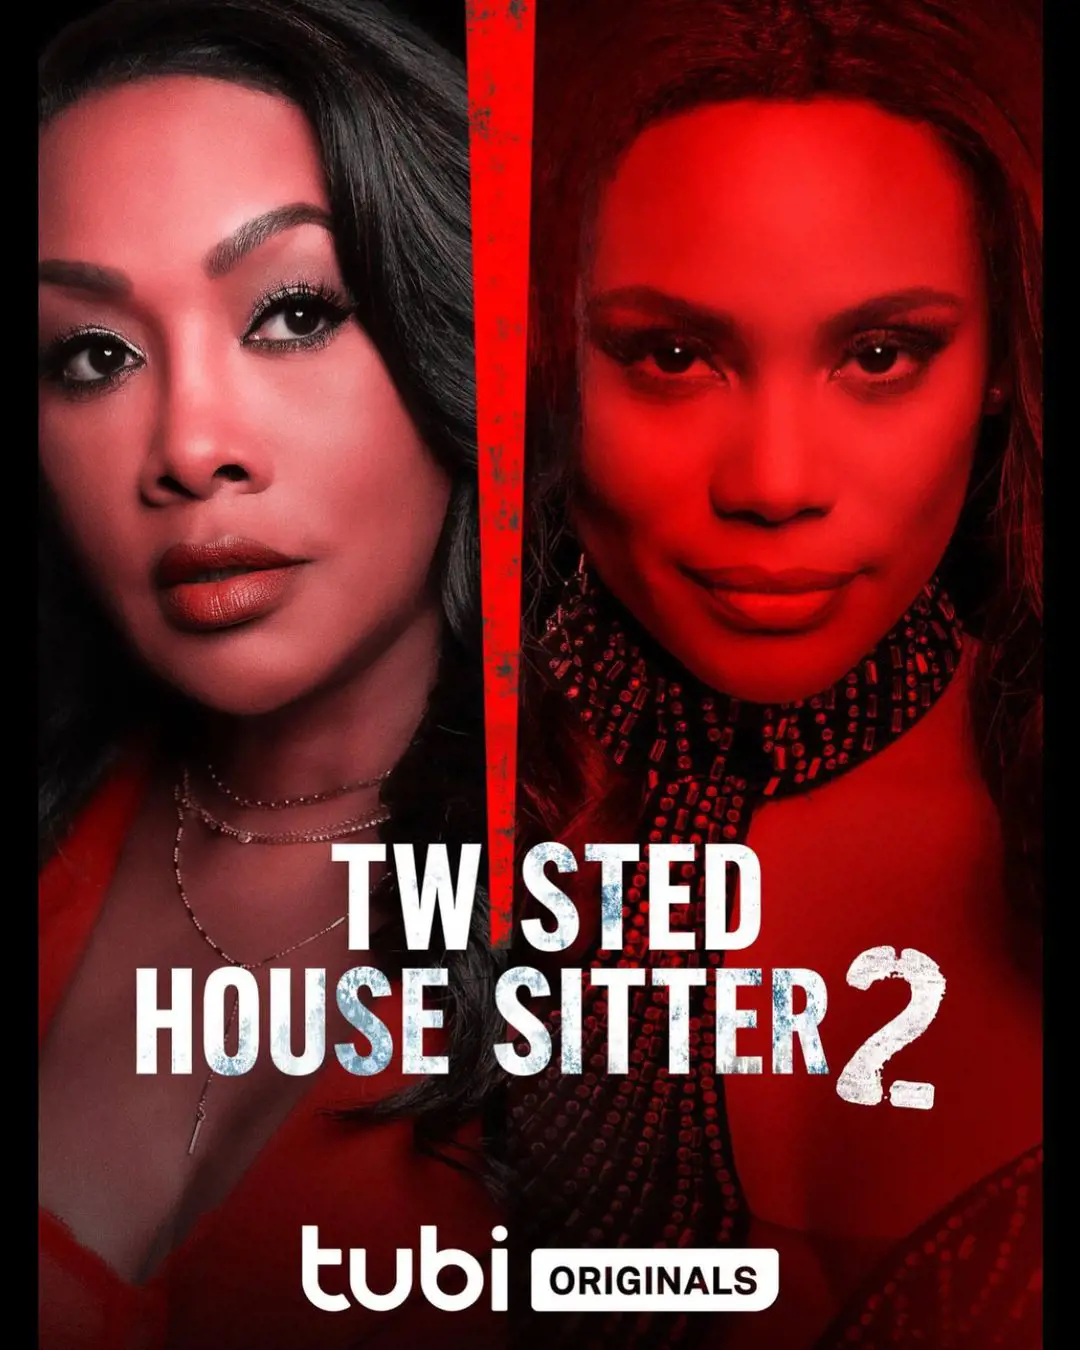 Twisted House Sitter 3 Release Date and Cast Details